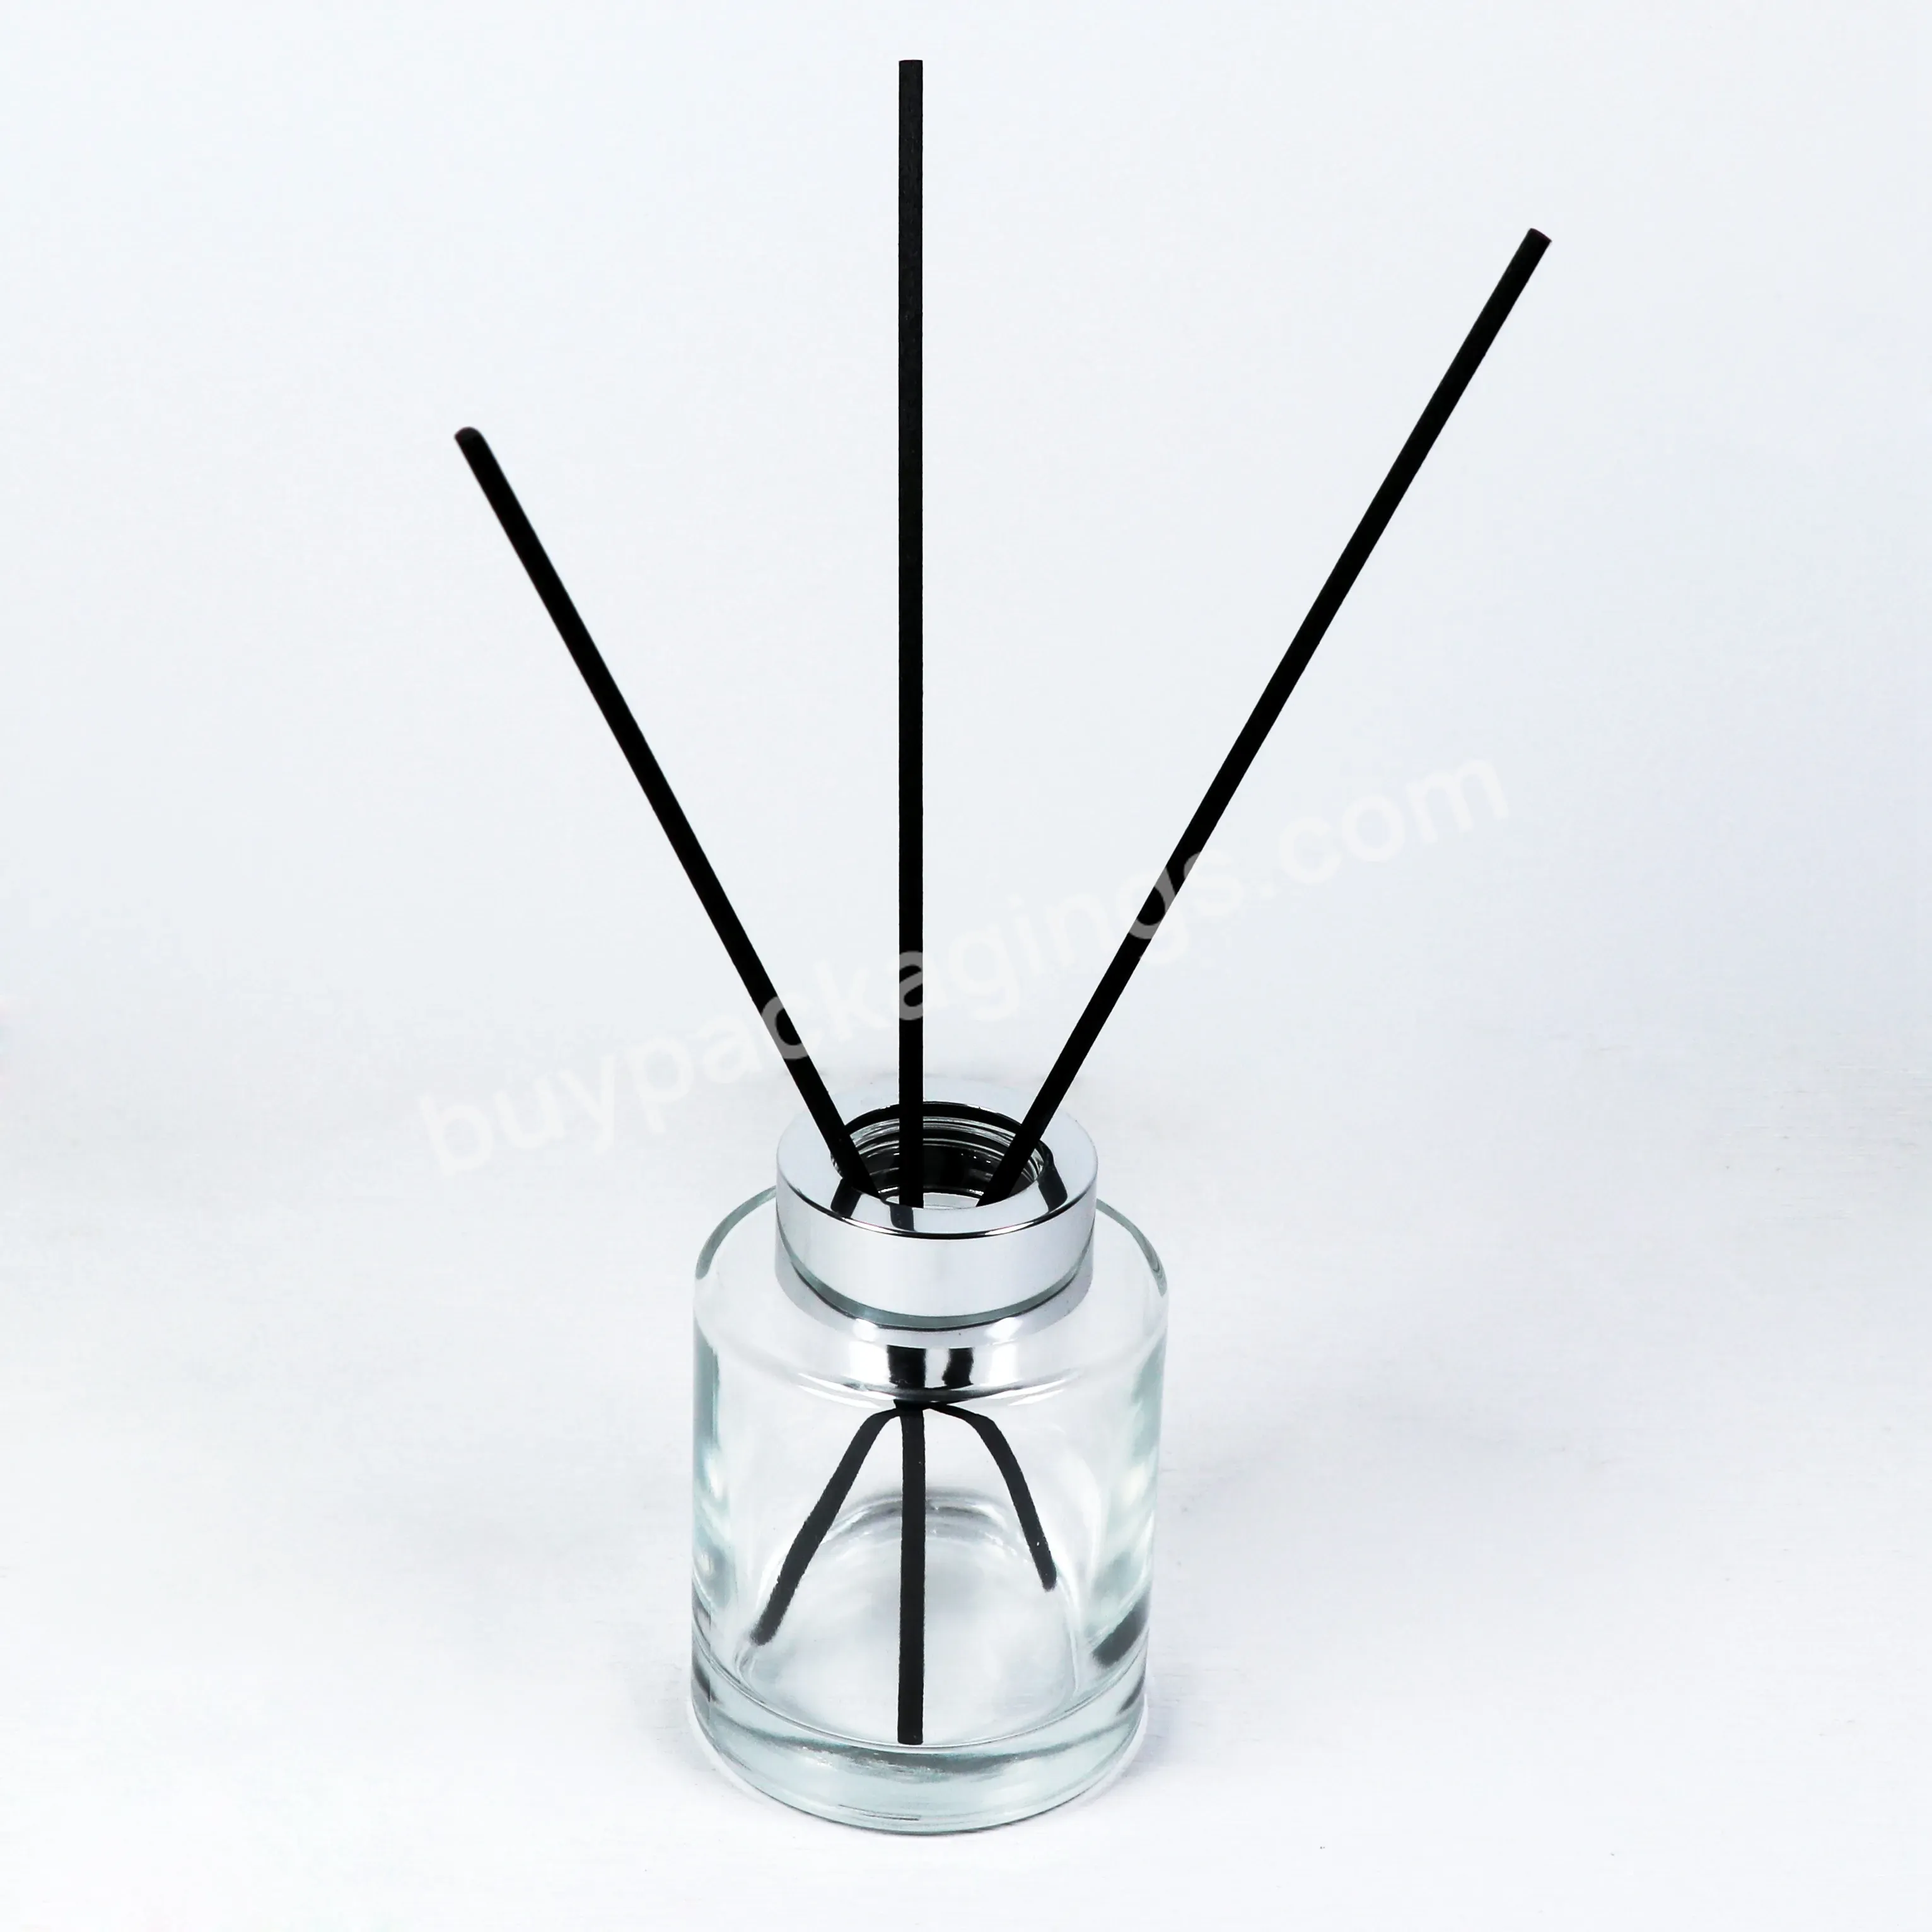 100ml 120ml 200ml 500ml Clear Glass Essential Oil Reed Diffuser Empty Bottles Wholesale - Buy 100ml 120ml Clear Glass Essential Oil,Reed Diffuser Empty Bottle,100ml Reed Diffuser Bottle.